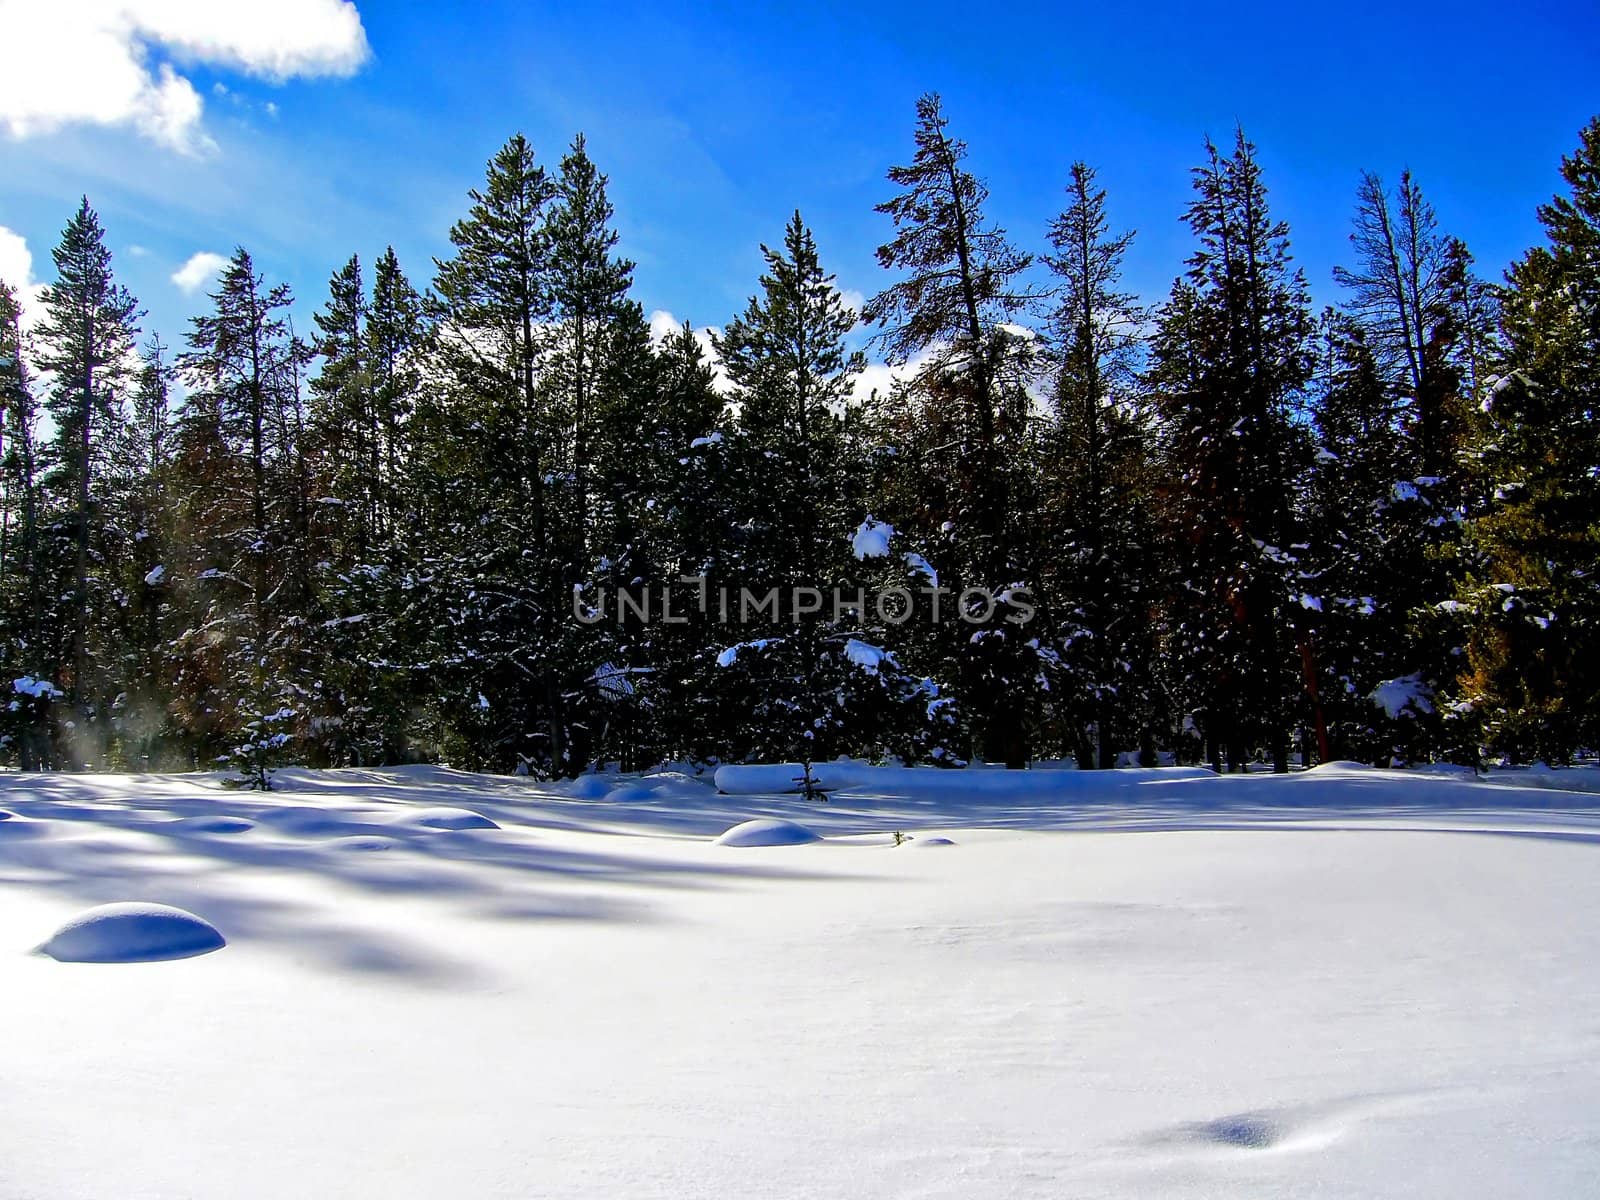 A snowy forest that is untouched by anyone